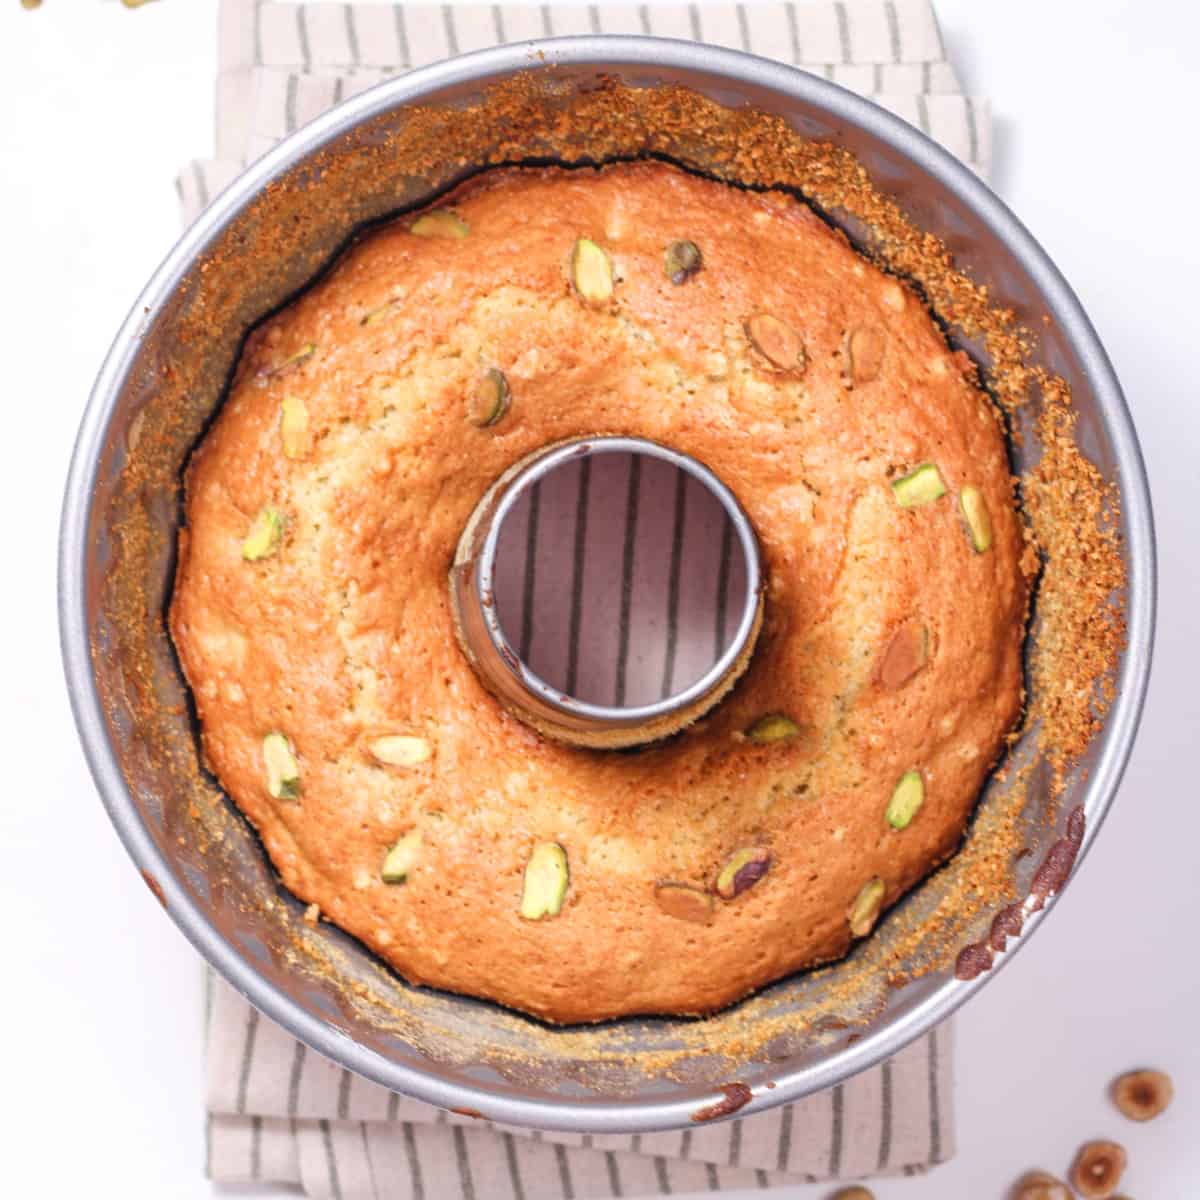 a photo of a pistachio pudding cake in a bundt pan. the bundt pan is sitting on a blue and white napkin